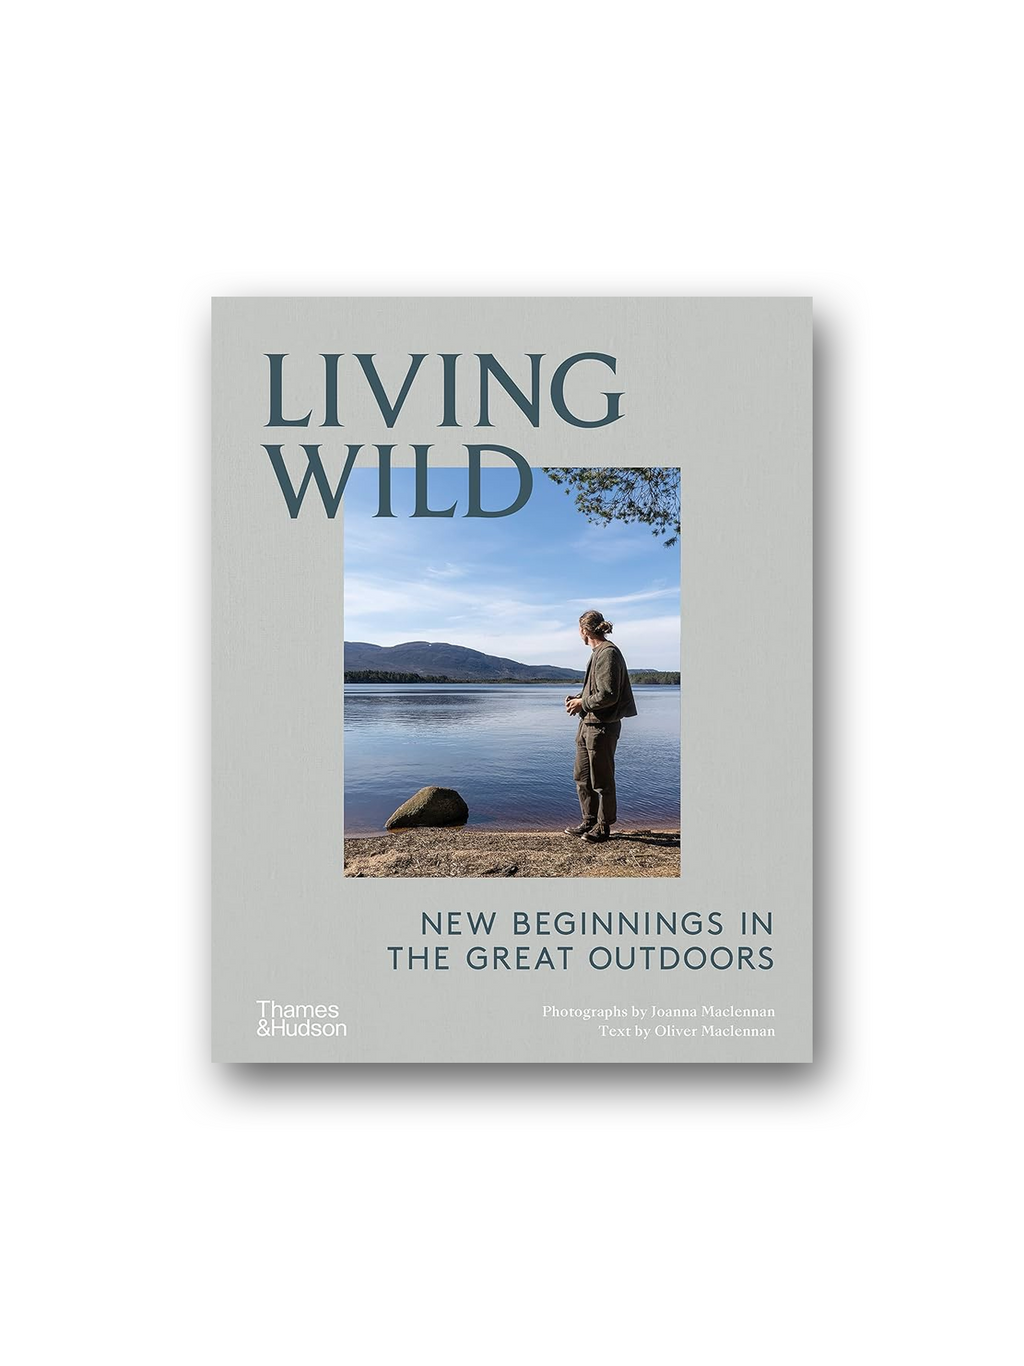 Living Wild: New Beginnings in the Great Outdoors